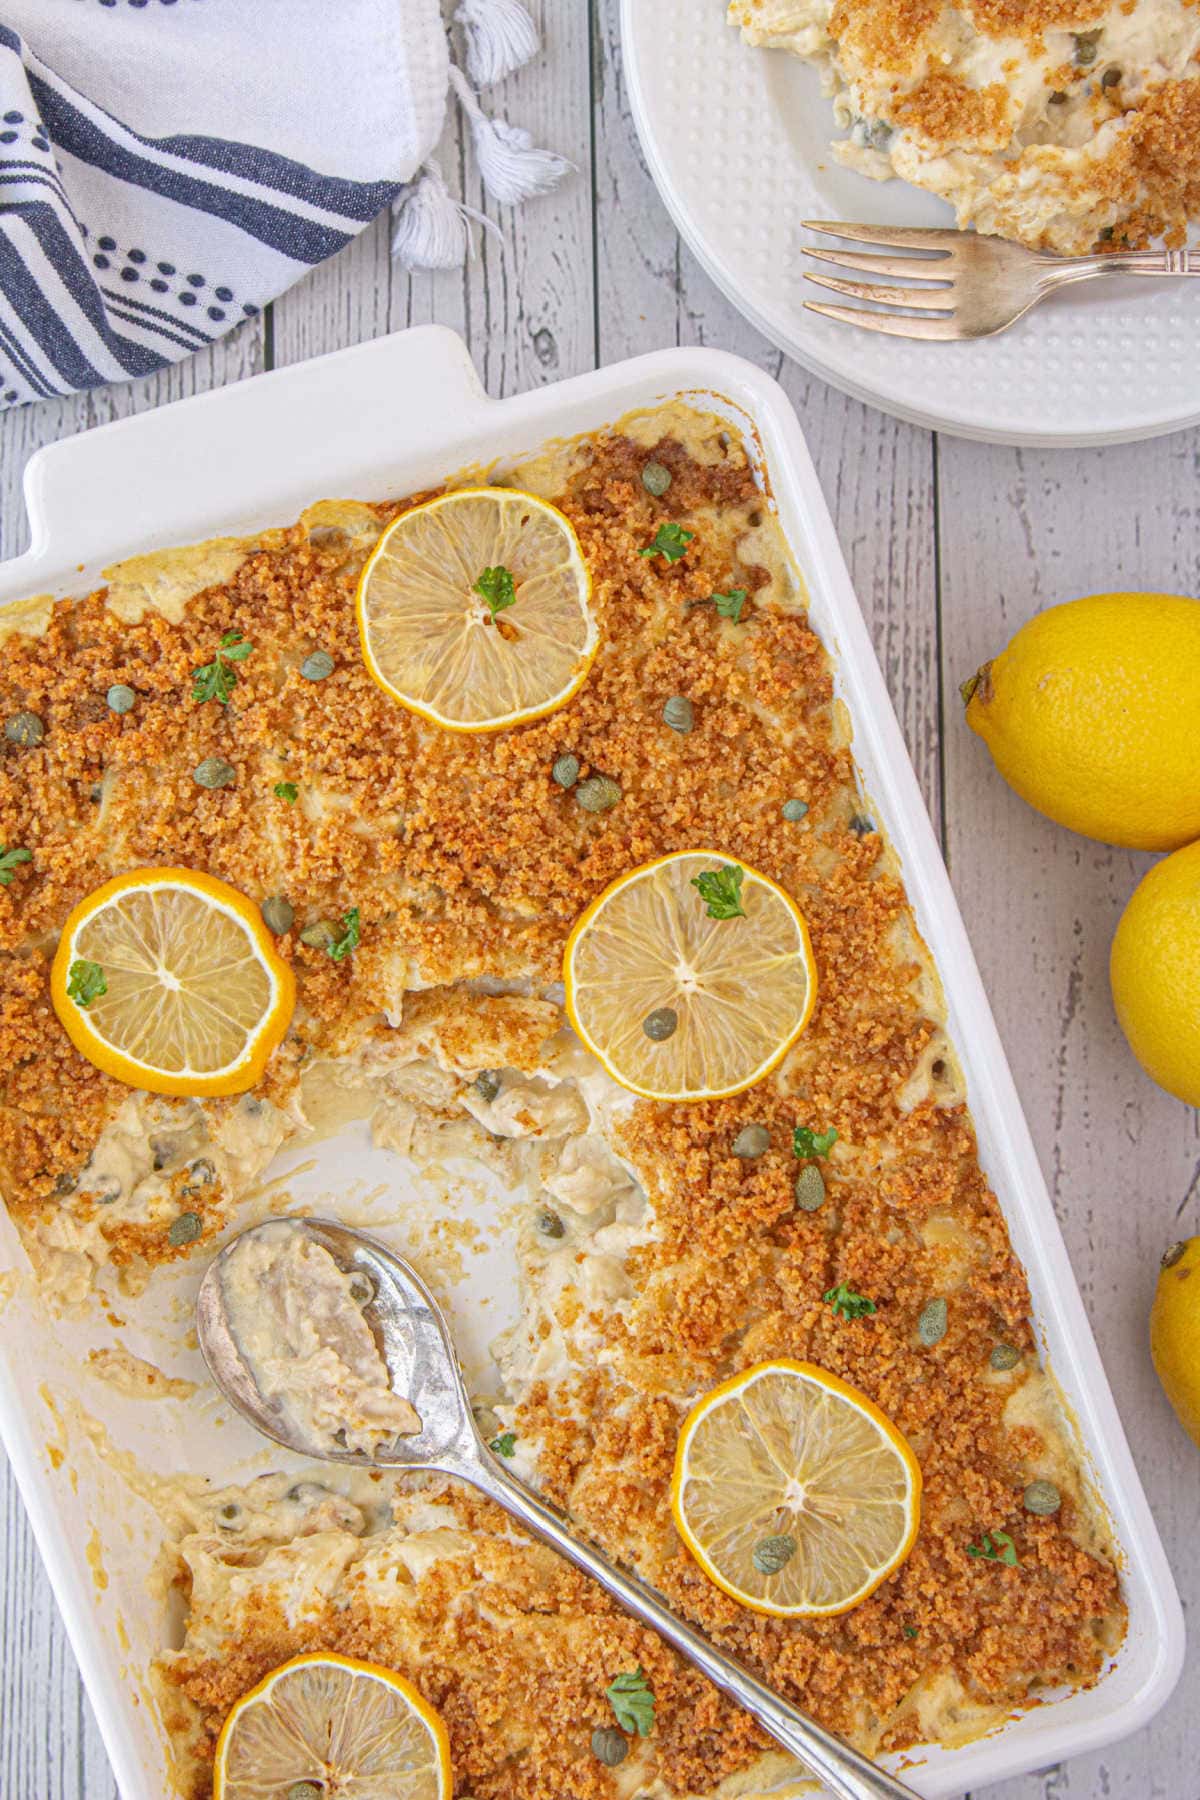 Overhead view of chicken piccata casserole garnished with lemon slices.